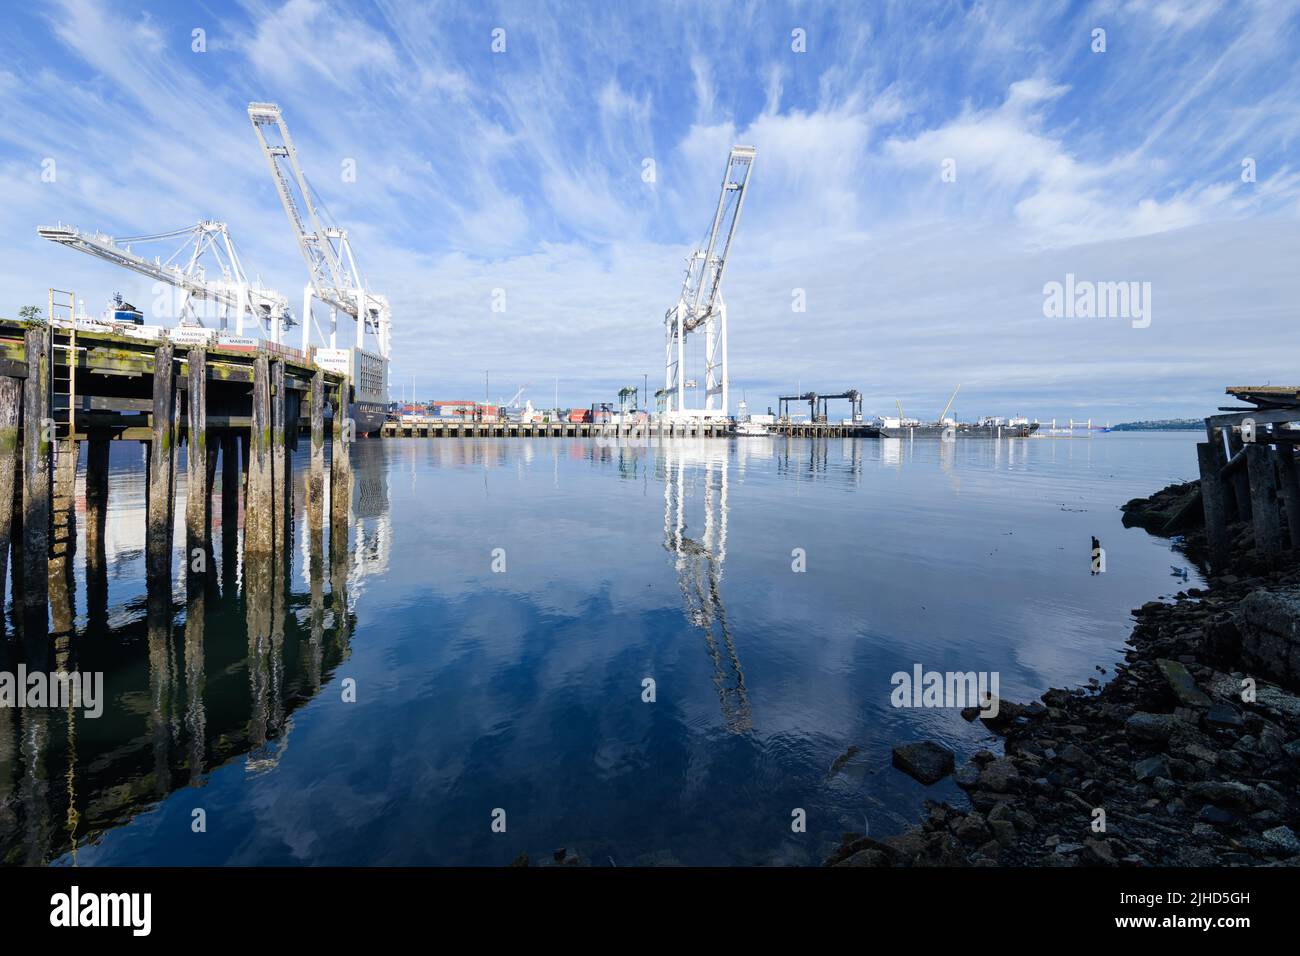 Seattle - July 09, 2022; Wide view of cranes a the Port of Seattle and an old wooden dock under blue sky with cloud streaks Stock Photo